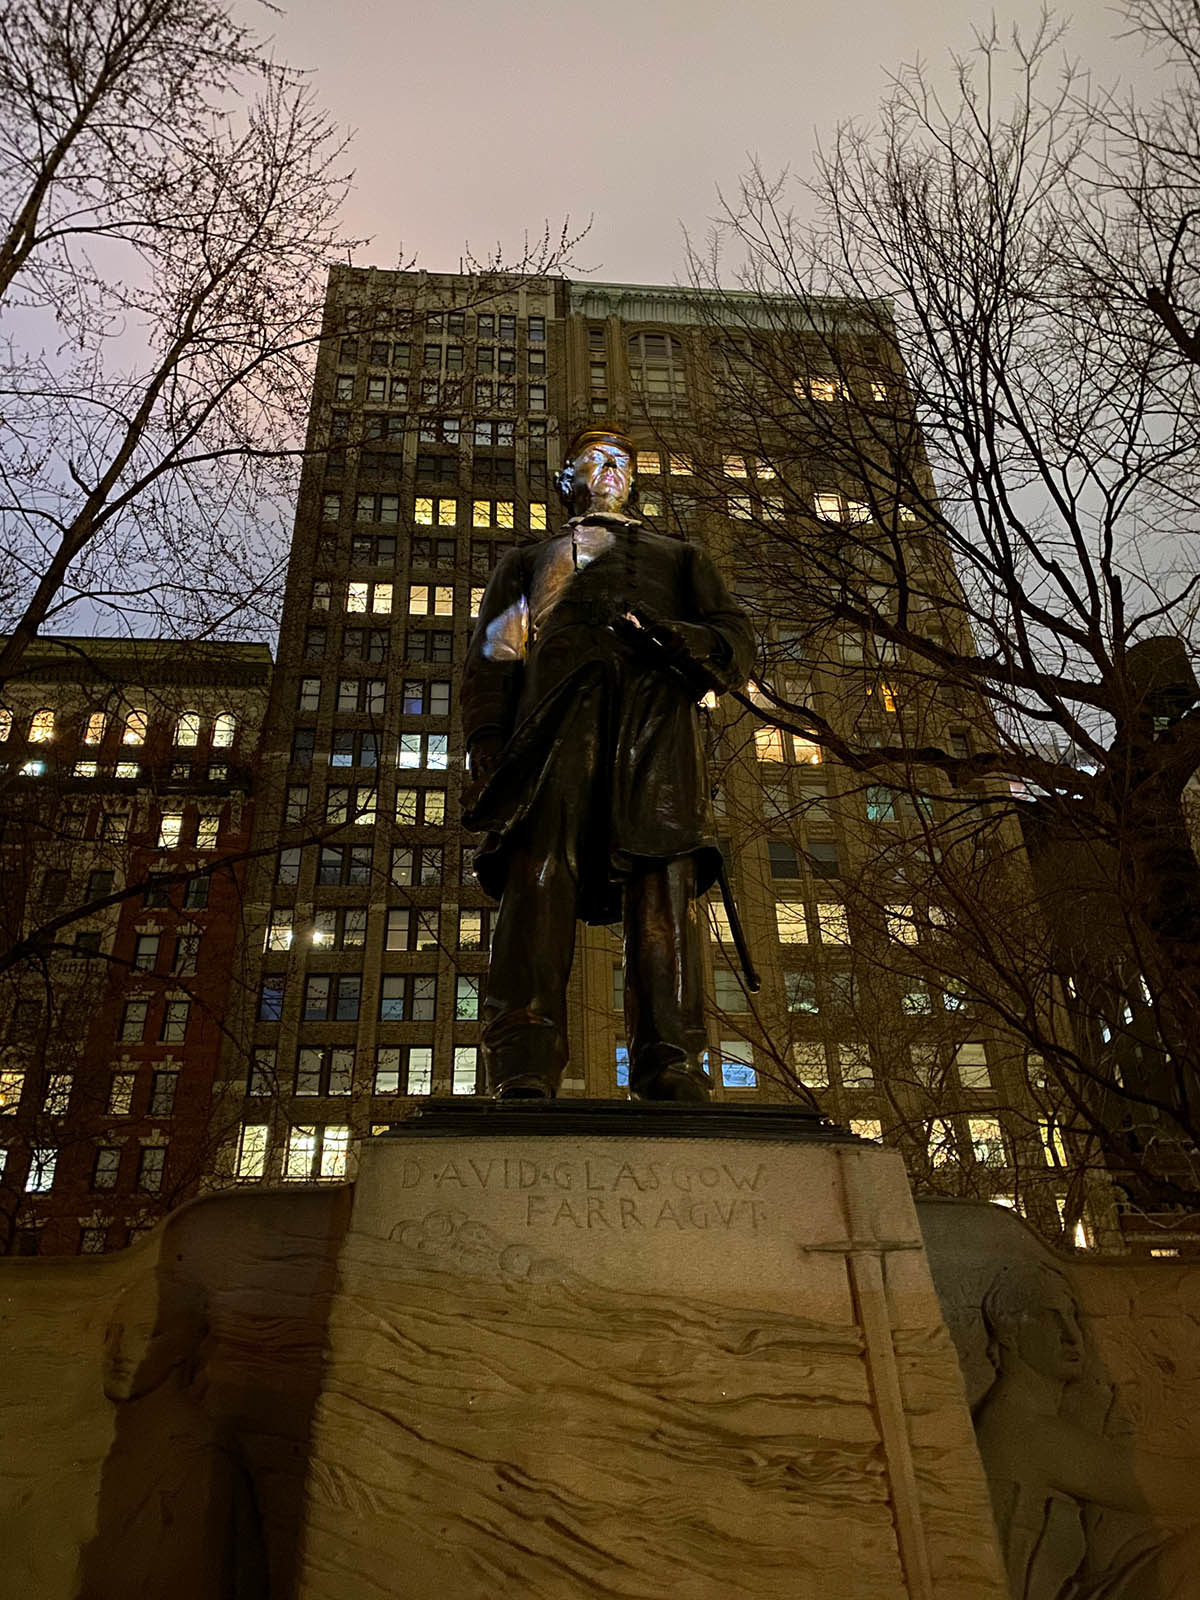 Photograph of a statue of a figure, seen from below. The statue stands in front of a tall building with many windows and a few sparse, neighboring trees.